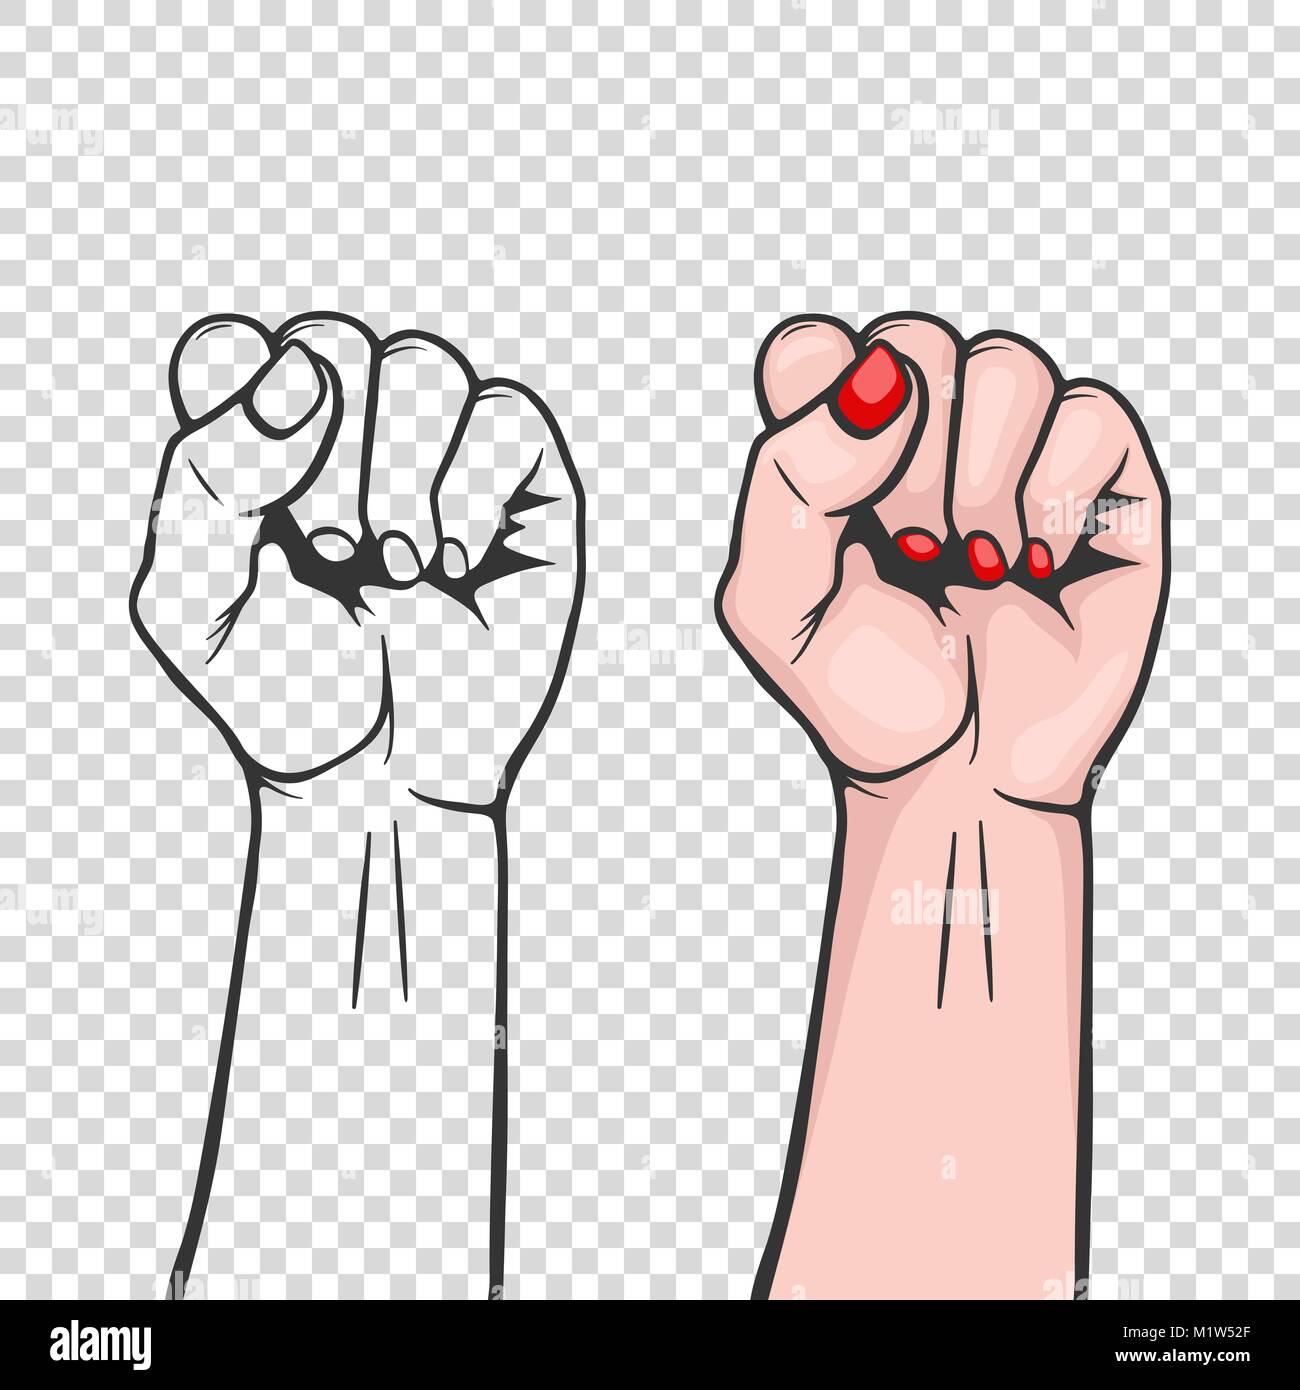 Raised women s fist isolated - symbol unity or solidarity, with oppressed people and women s rights. Feminism, protest, rebel, revolution or strike sign. Template for art posters, backgrounds etc Stock Vector